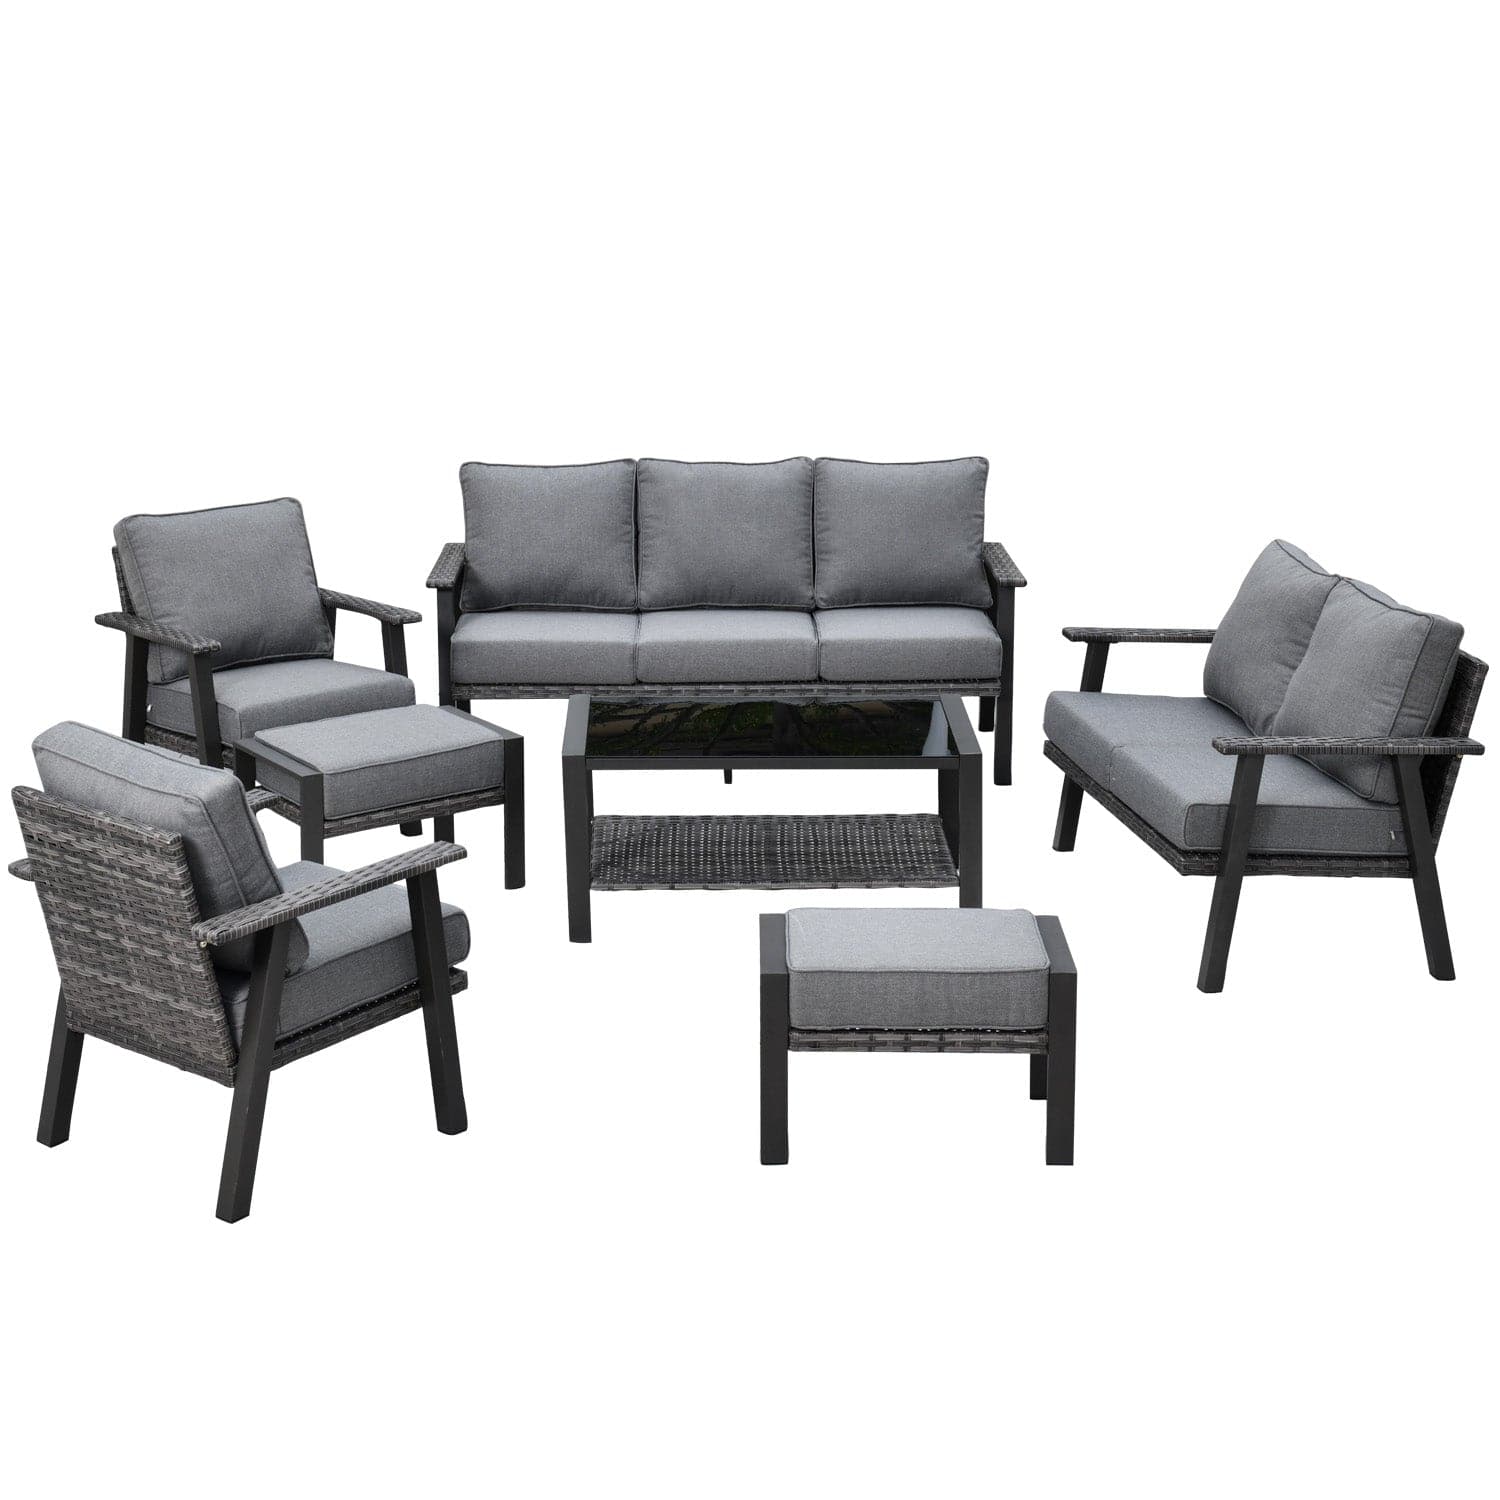 Ovios Outdoor furniture 7 Piece with Table and 2 Ottomans, 5''Cushion, Olefin Fabric